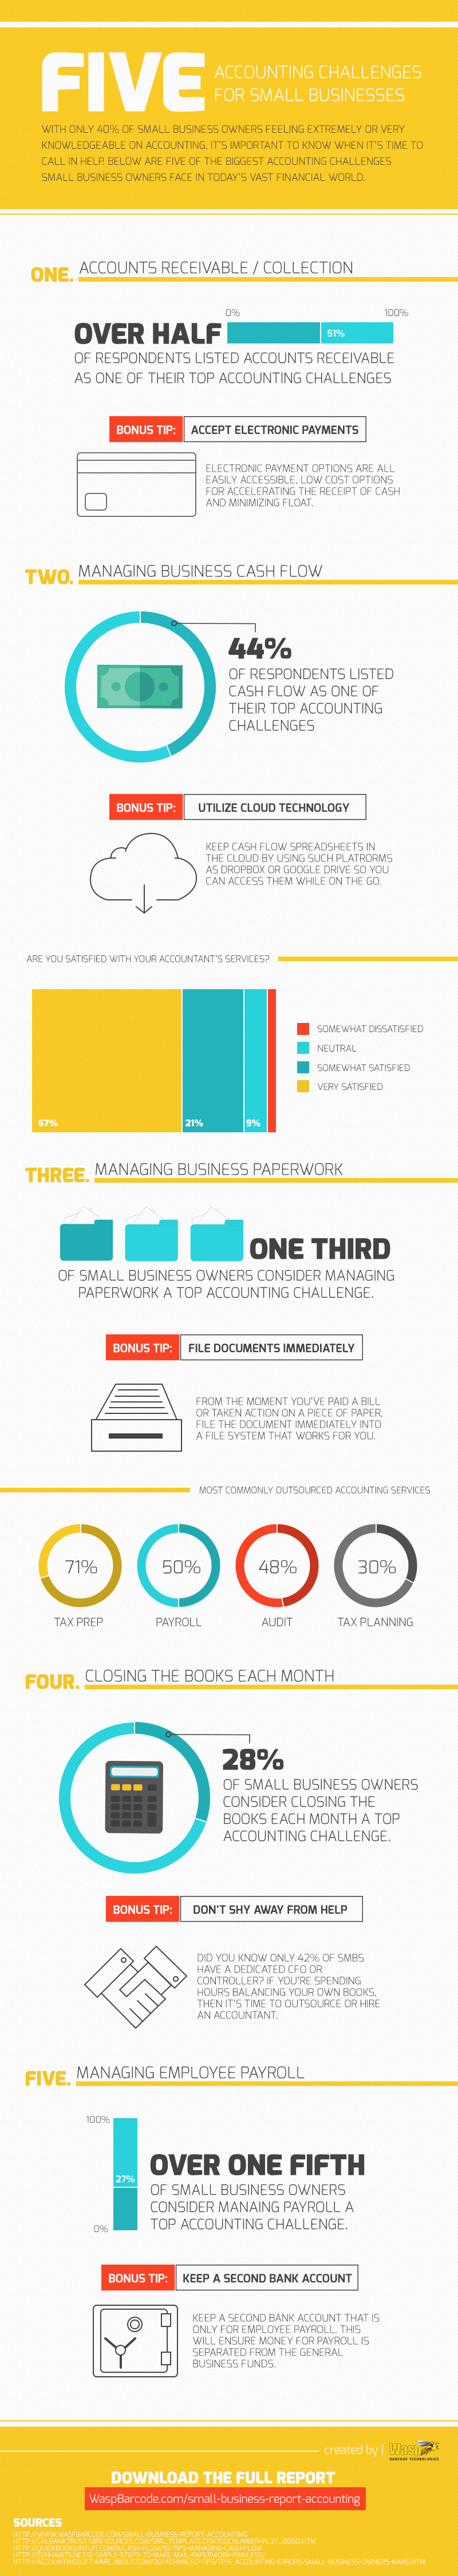 5 Accounting Challenges for Small Businesses